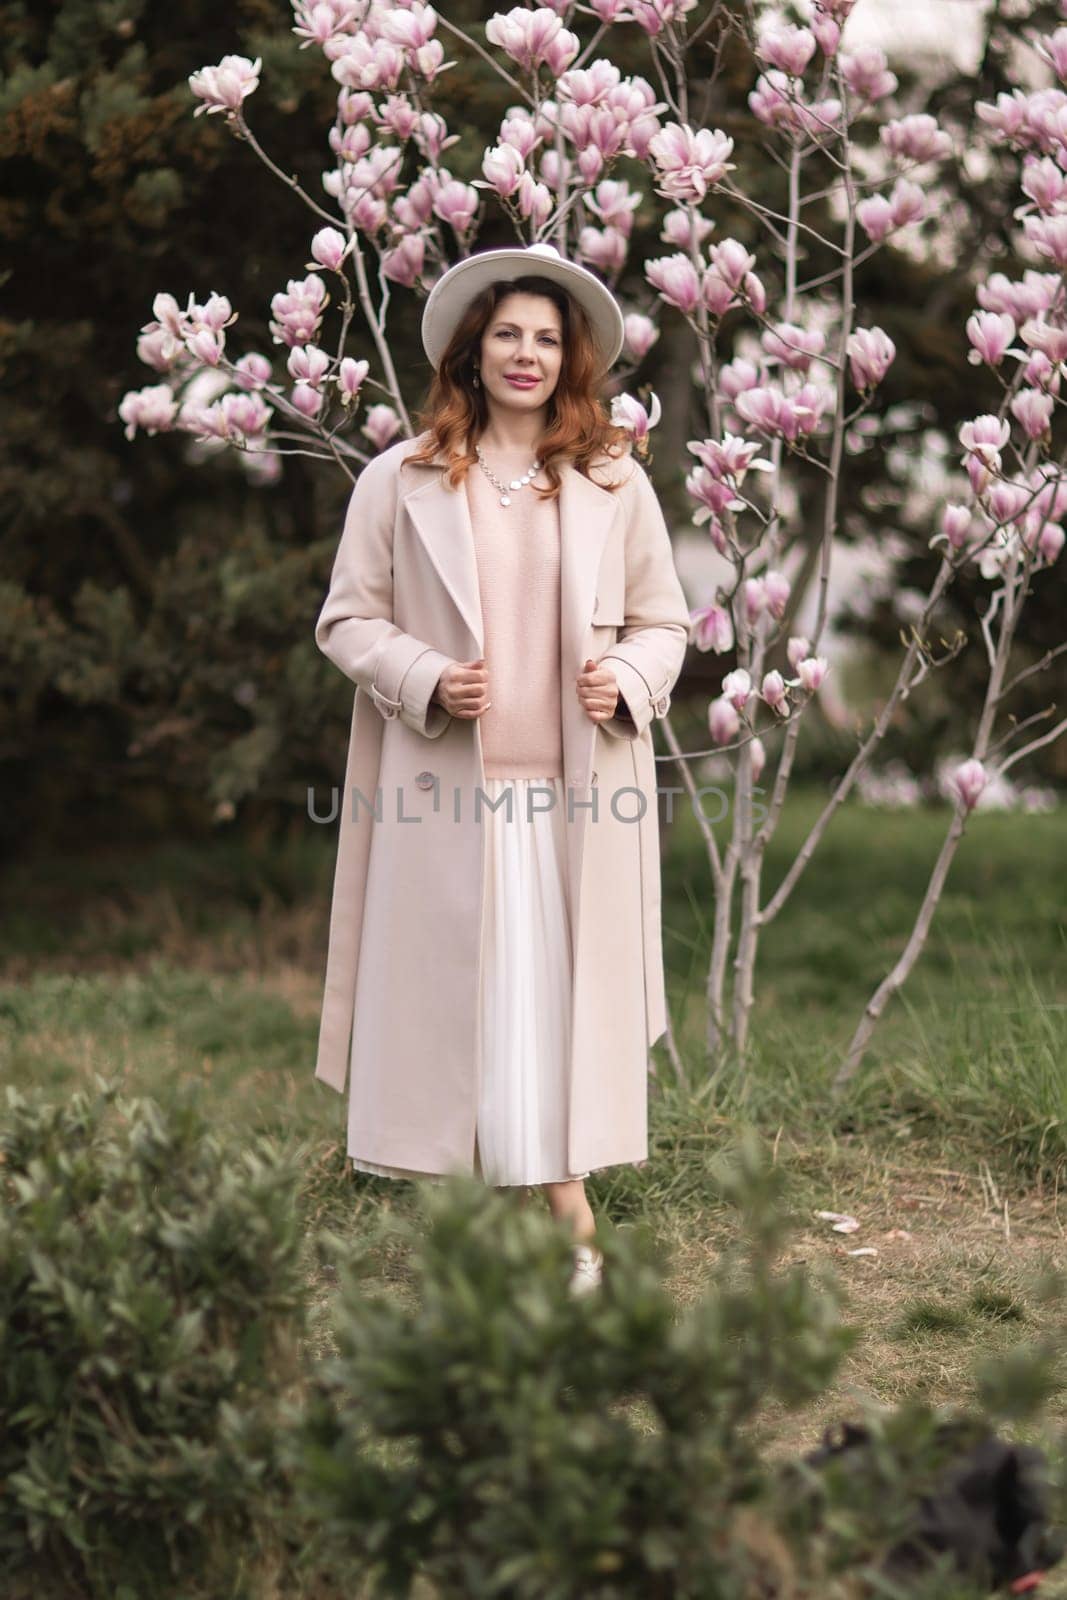 Woman magnolia flowers, surrounded by blossoming trees., hair down, white hat, wearing a light coat. Captured during spring, showcasing natural beauty and seasonal change. by Matiunina